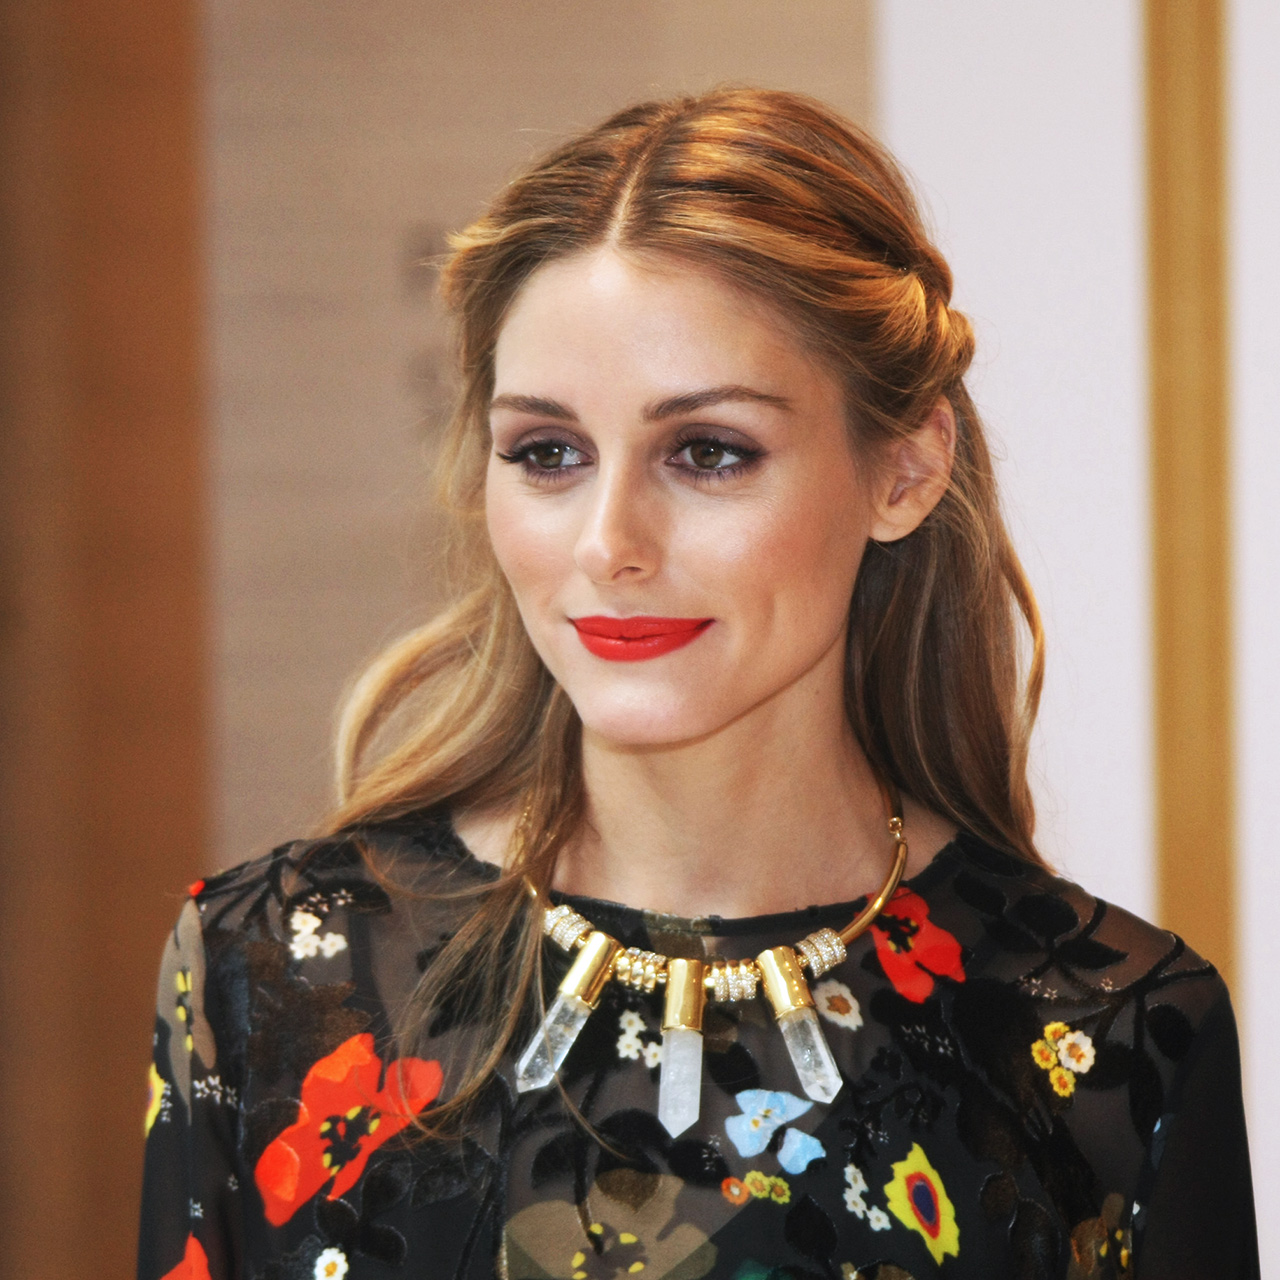 Olivia Palermo Proves You Can Wear A Daytime Smoky Eye And Bold Lip